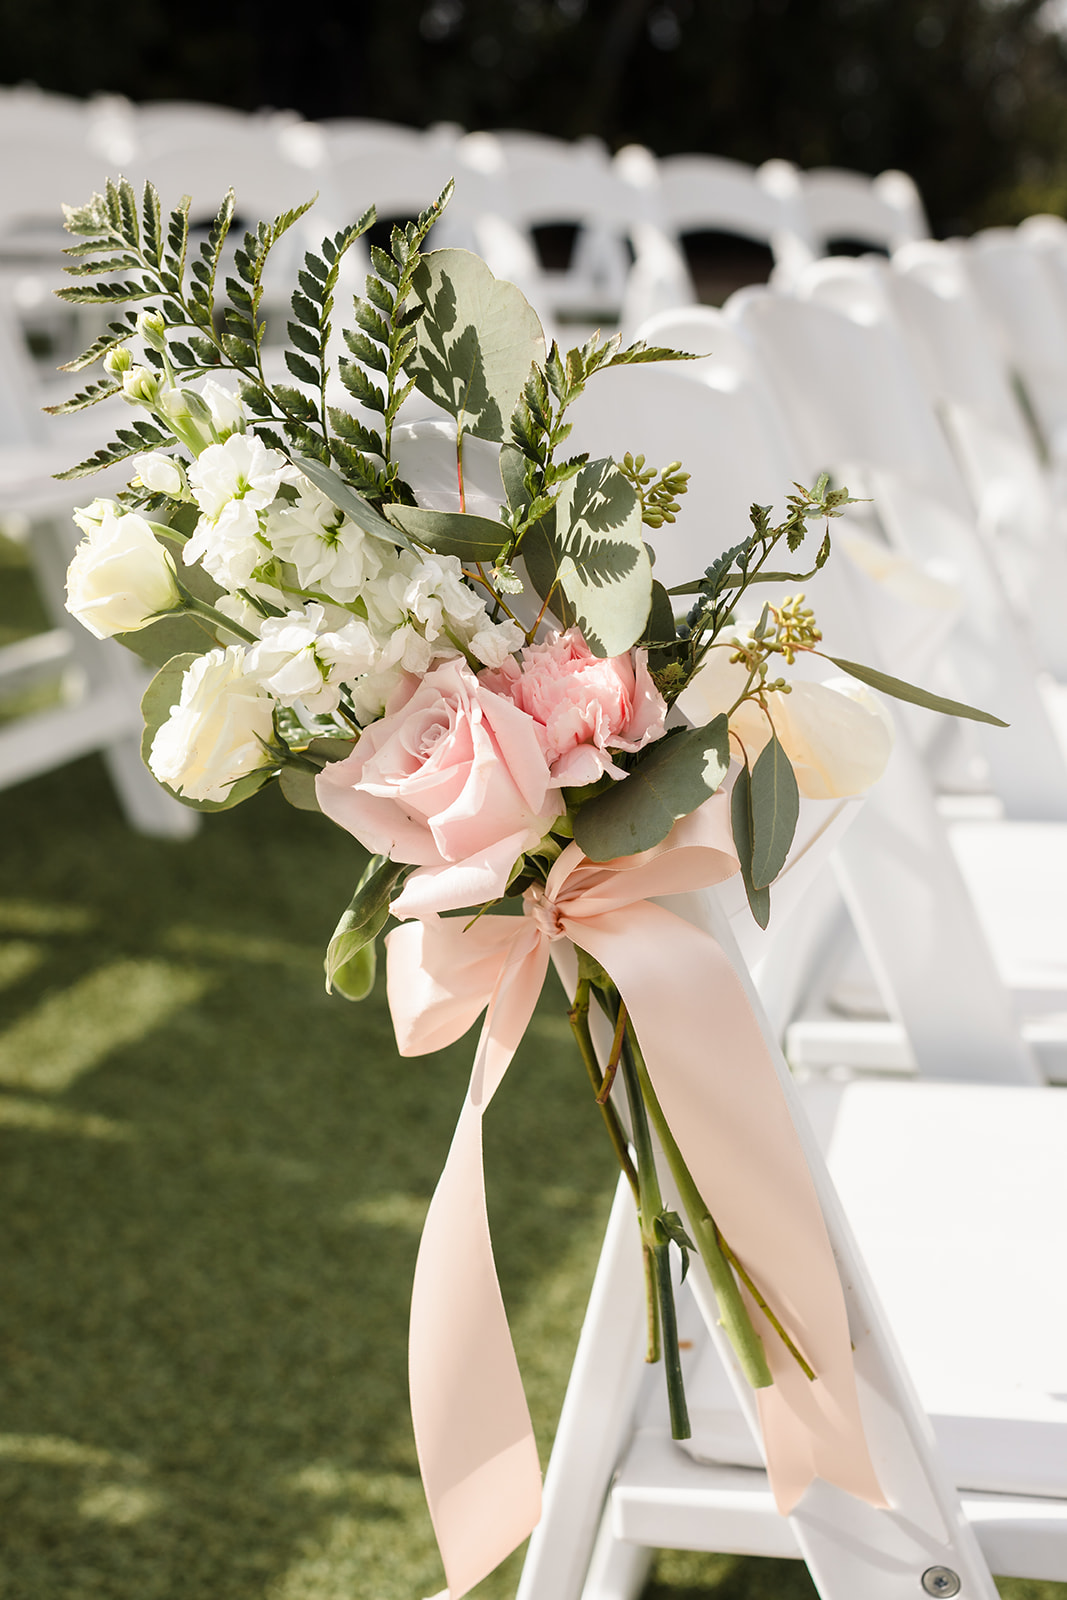 Pink and white flowers line the ceremony aisle at The Orchard.